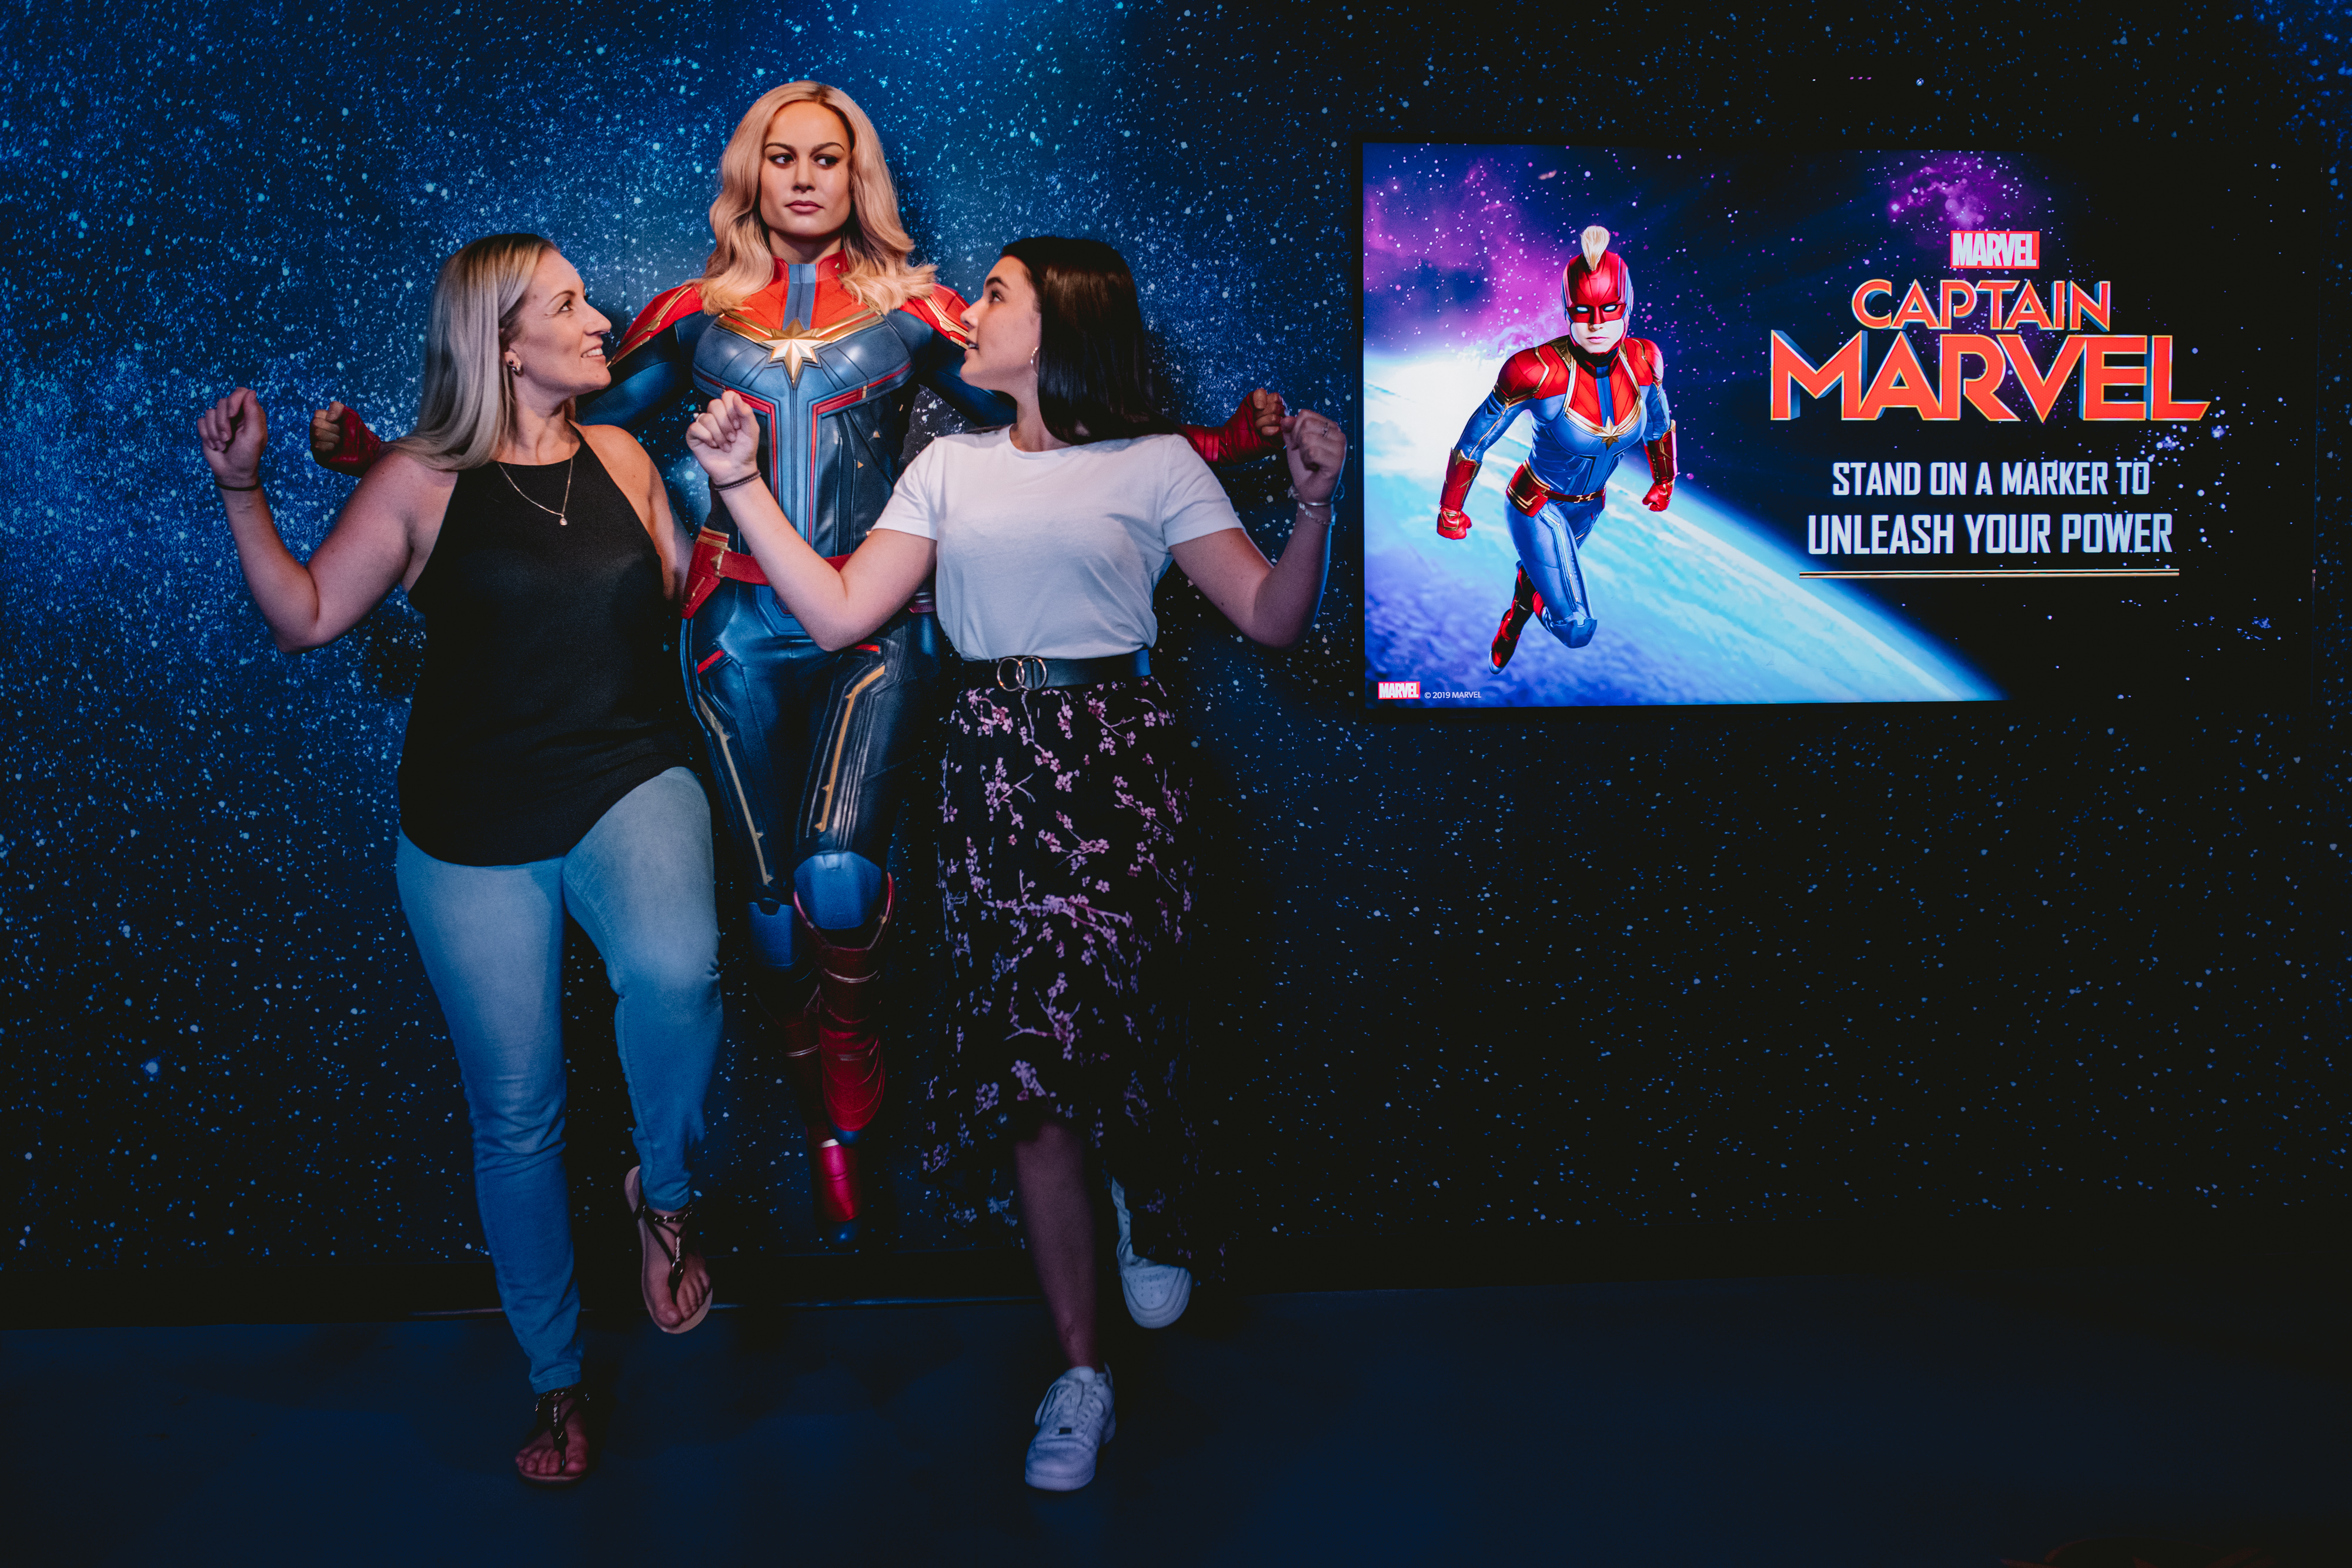 Madame Tussauds Sydney Guests Posing With Captain Marvel (1)